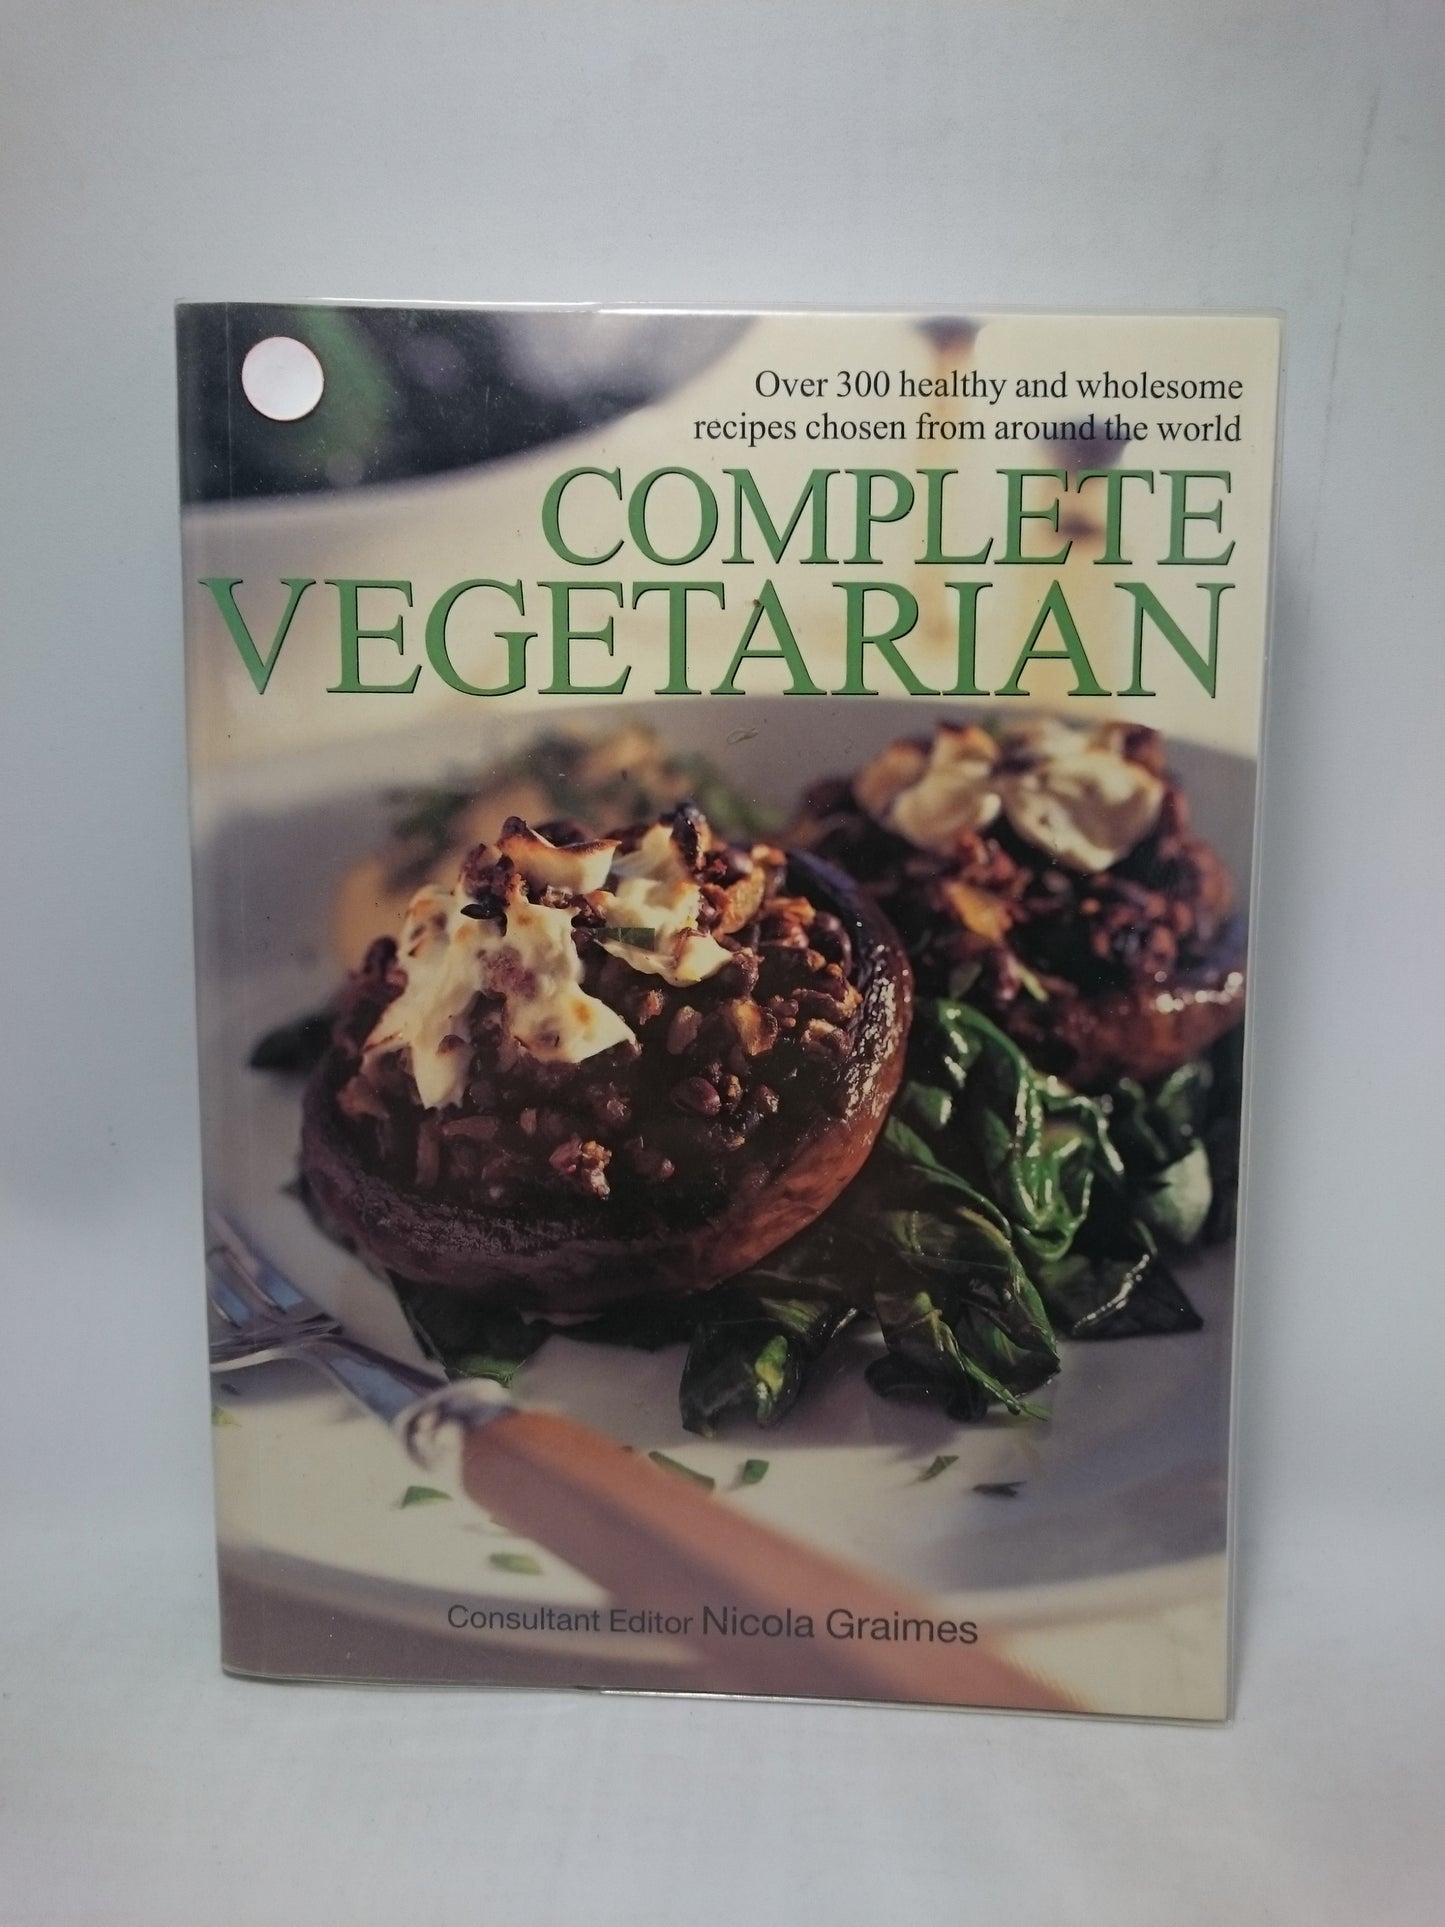 Complete Vegetarian: Over 300 Healthy And Wholesome Recipes Chosen From Around The World